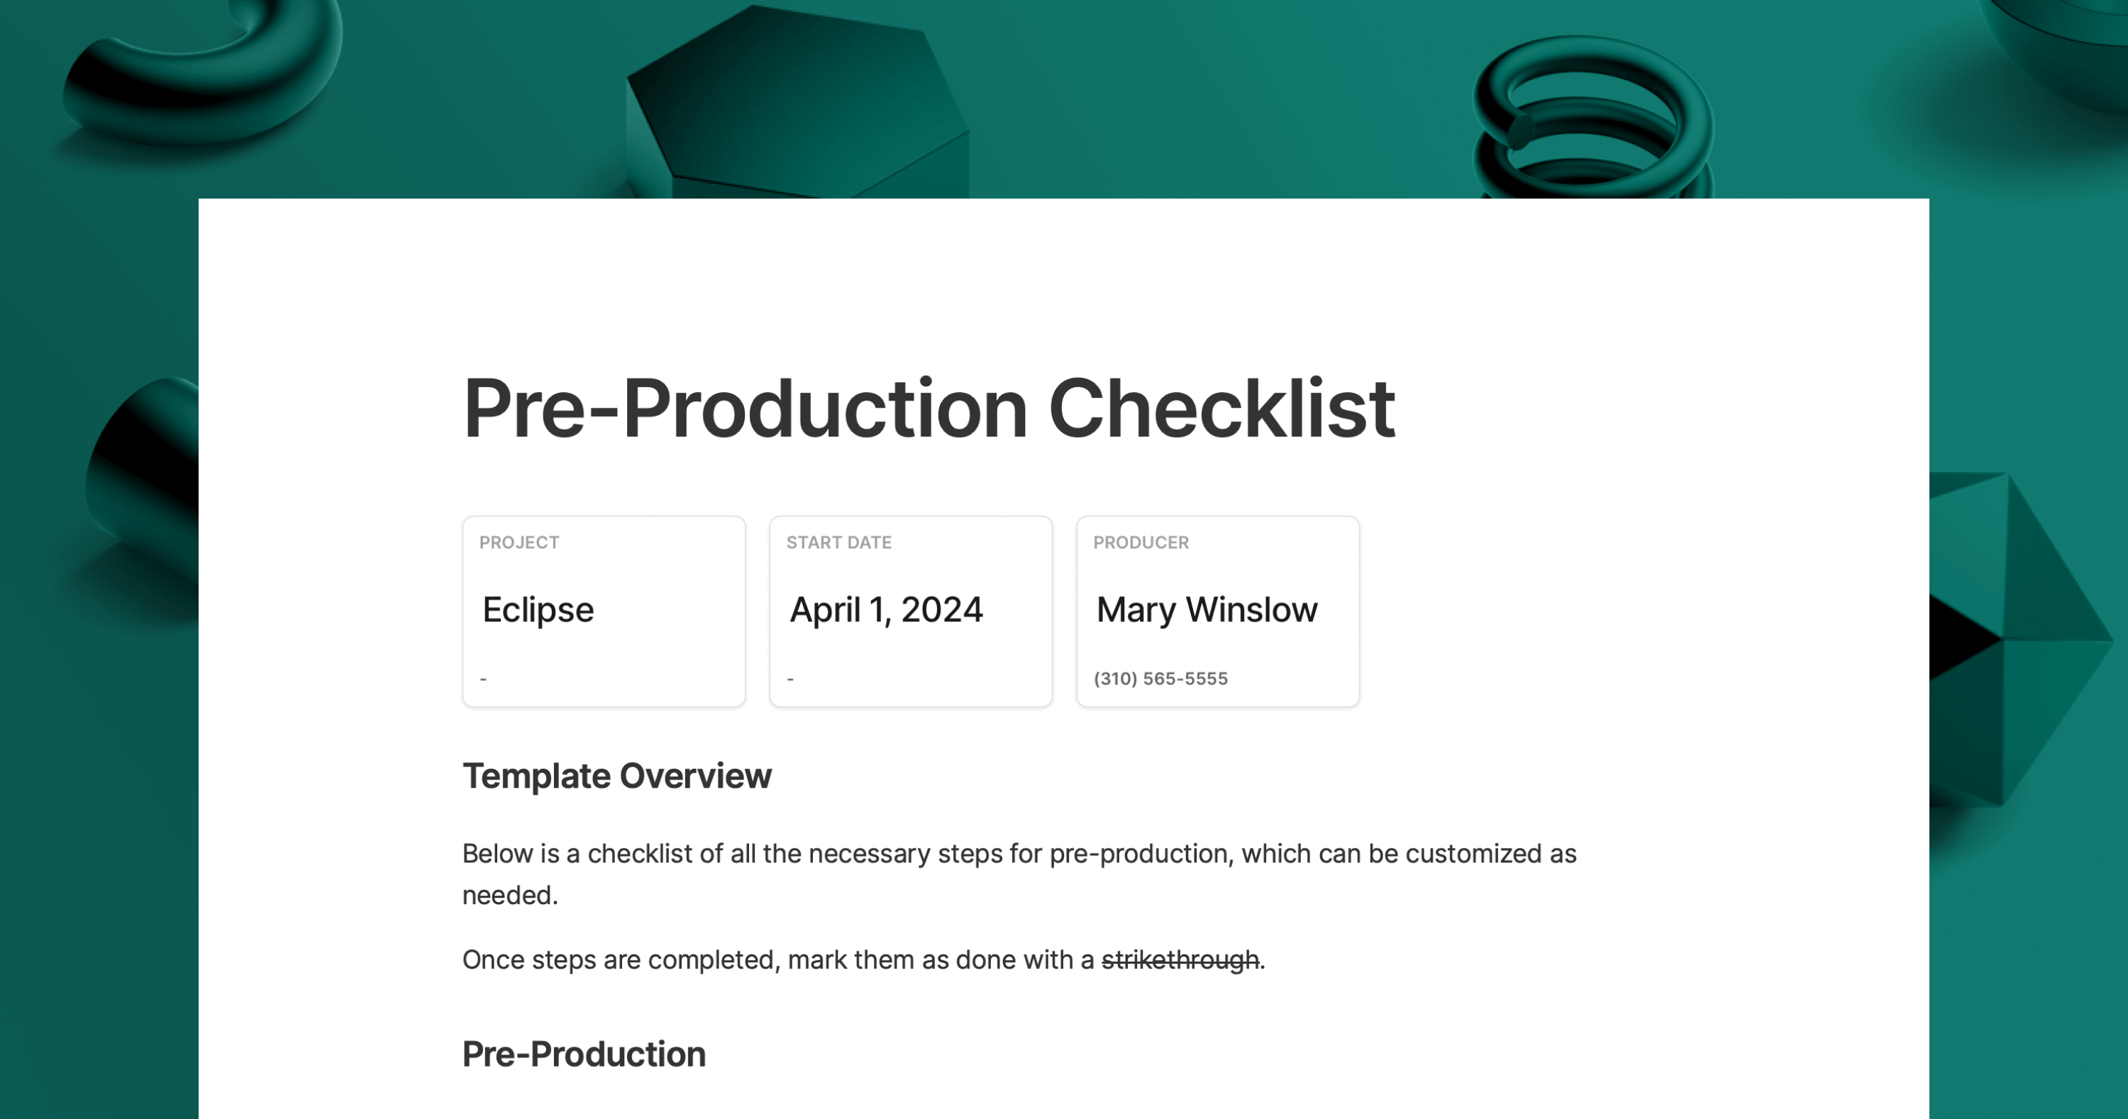 https://3389140.fs1.hubspotusercontent-na1.net/hubfs/3389140/pre%20production%20checklist%20cover-1.png